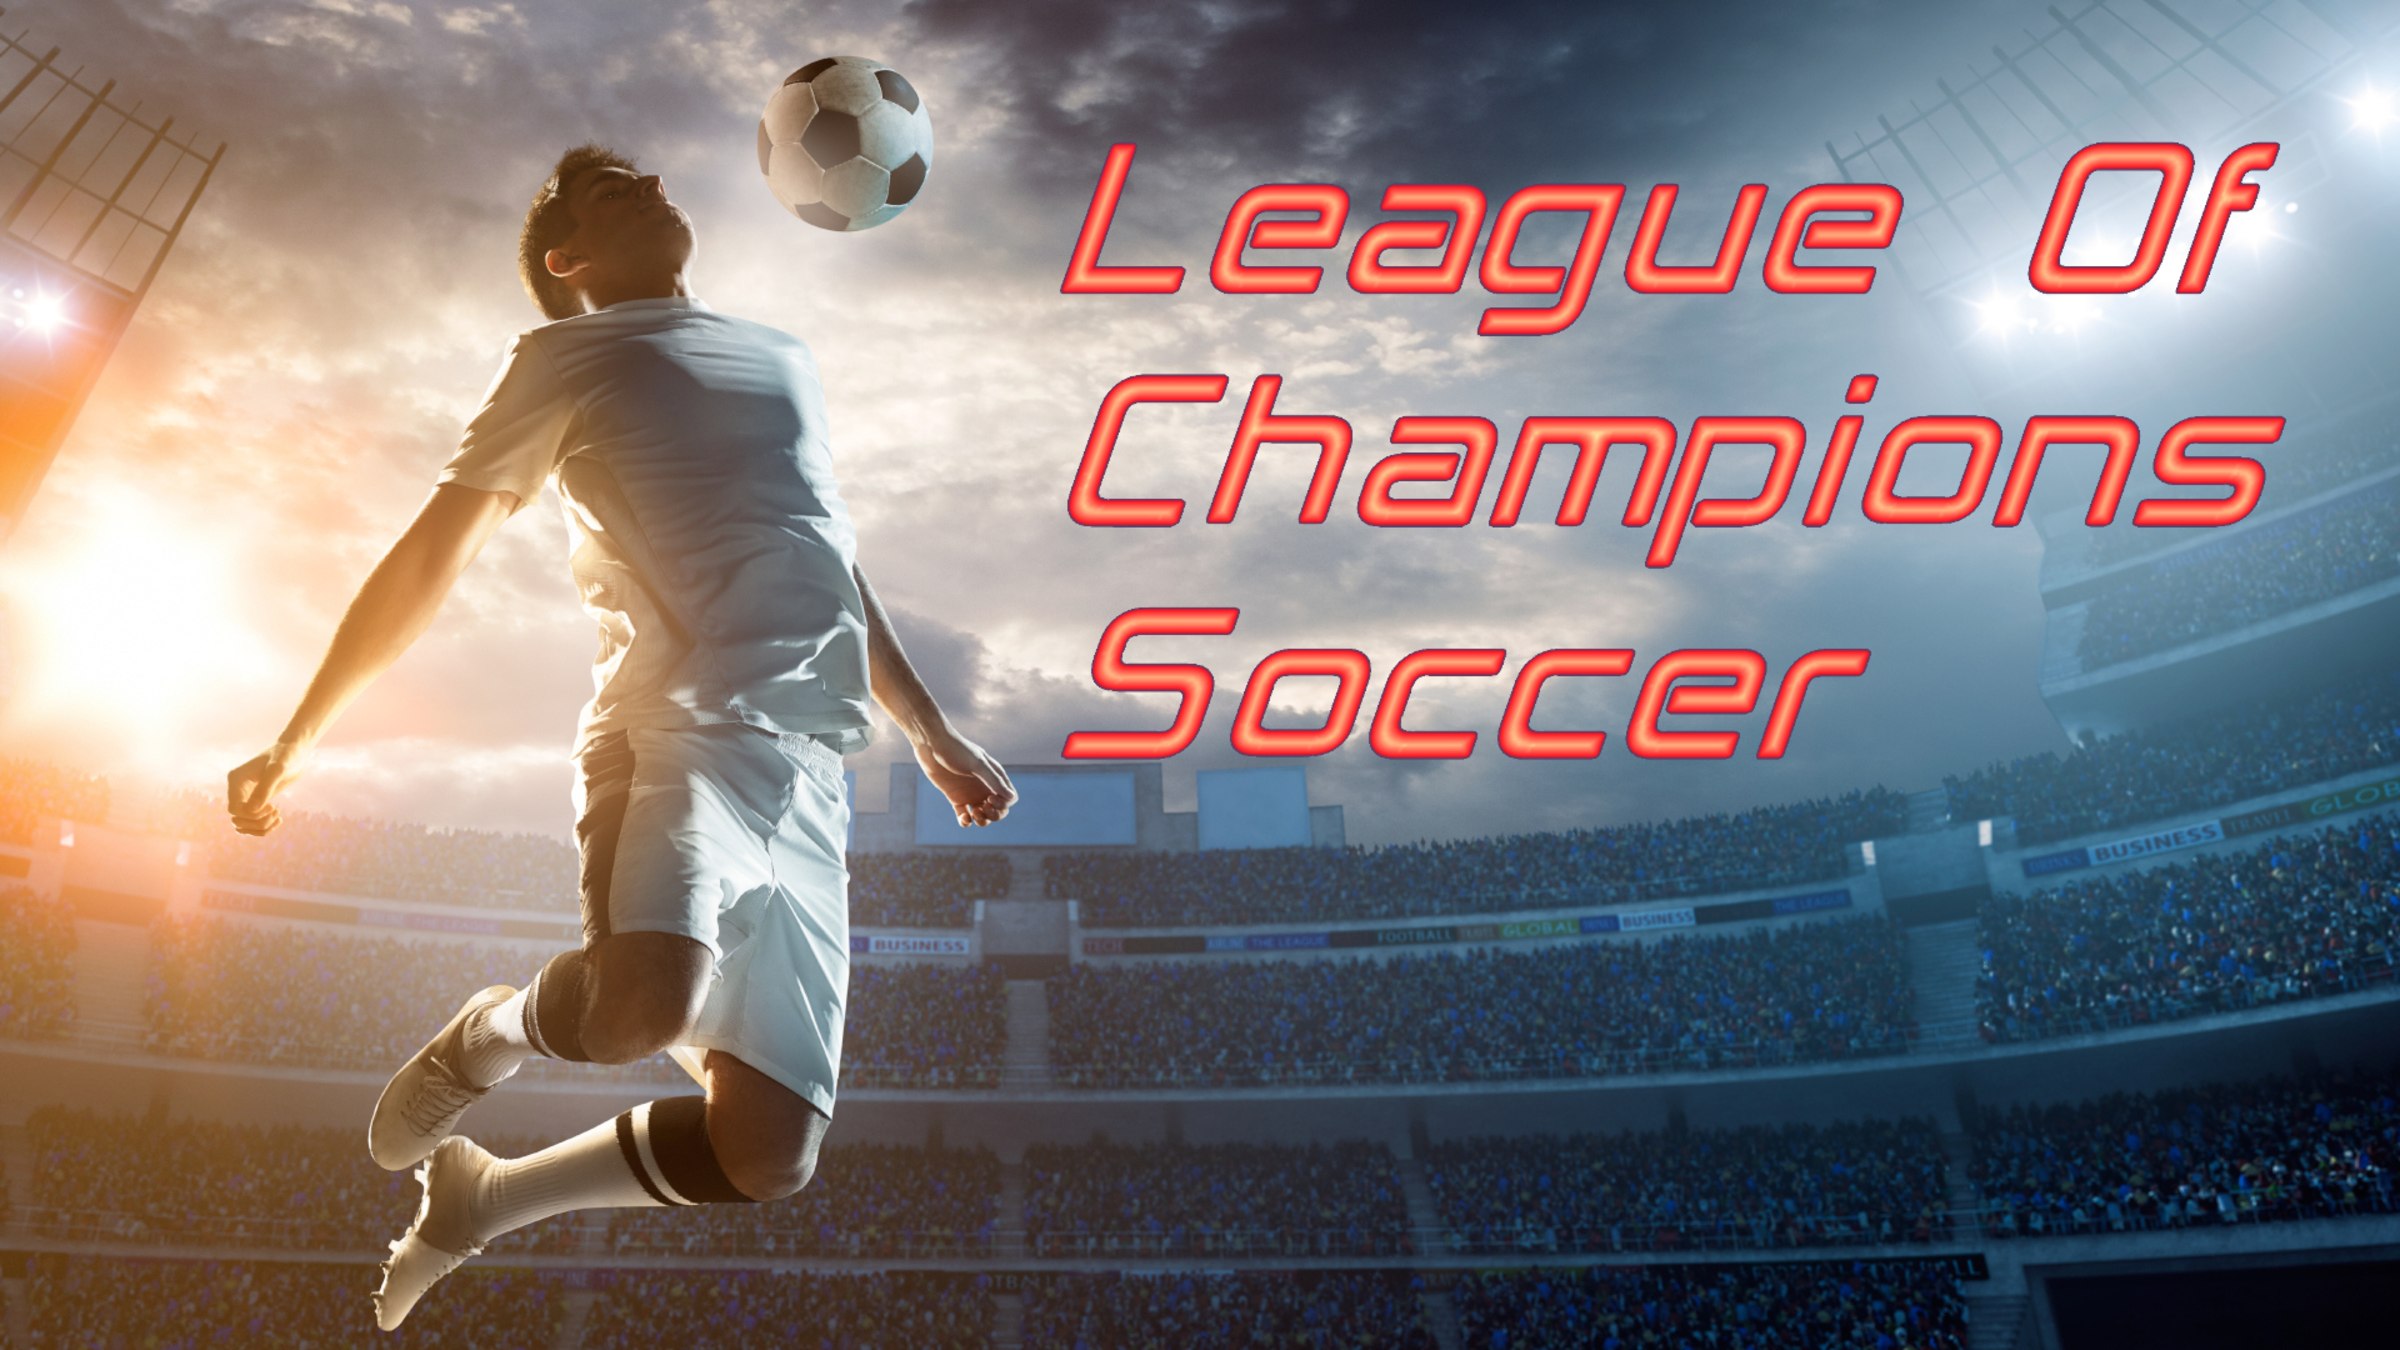 League Of Champions Soccer for Nintendo Switch